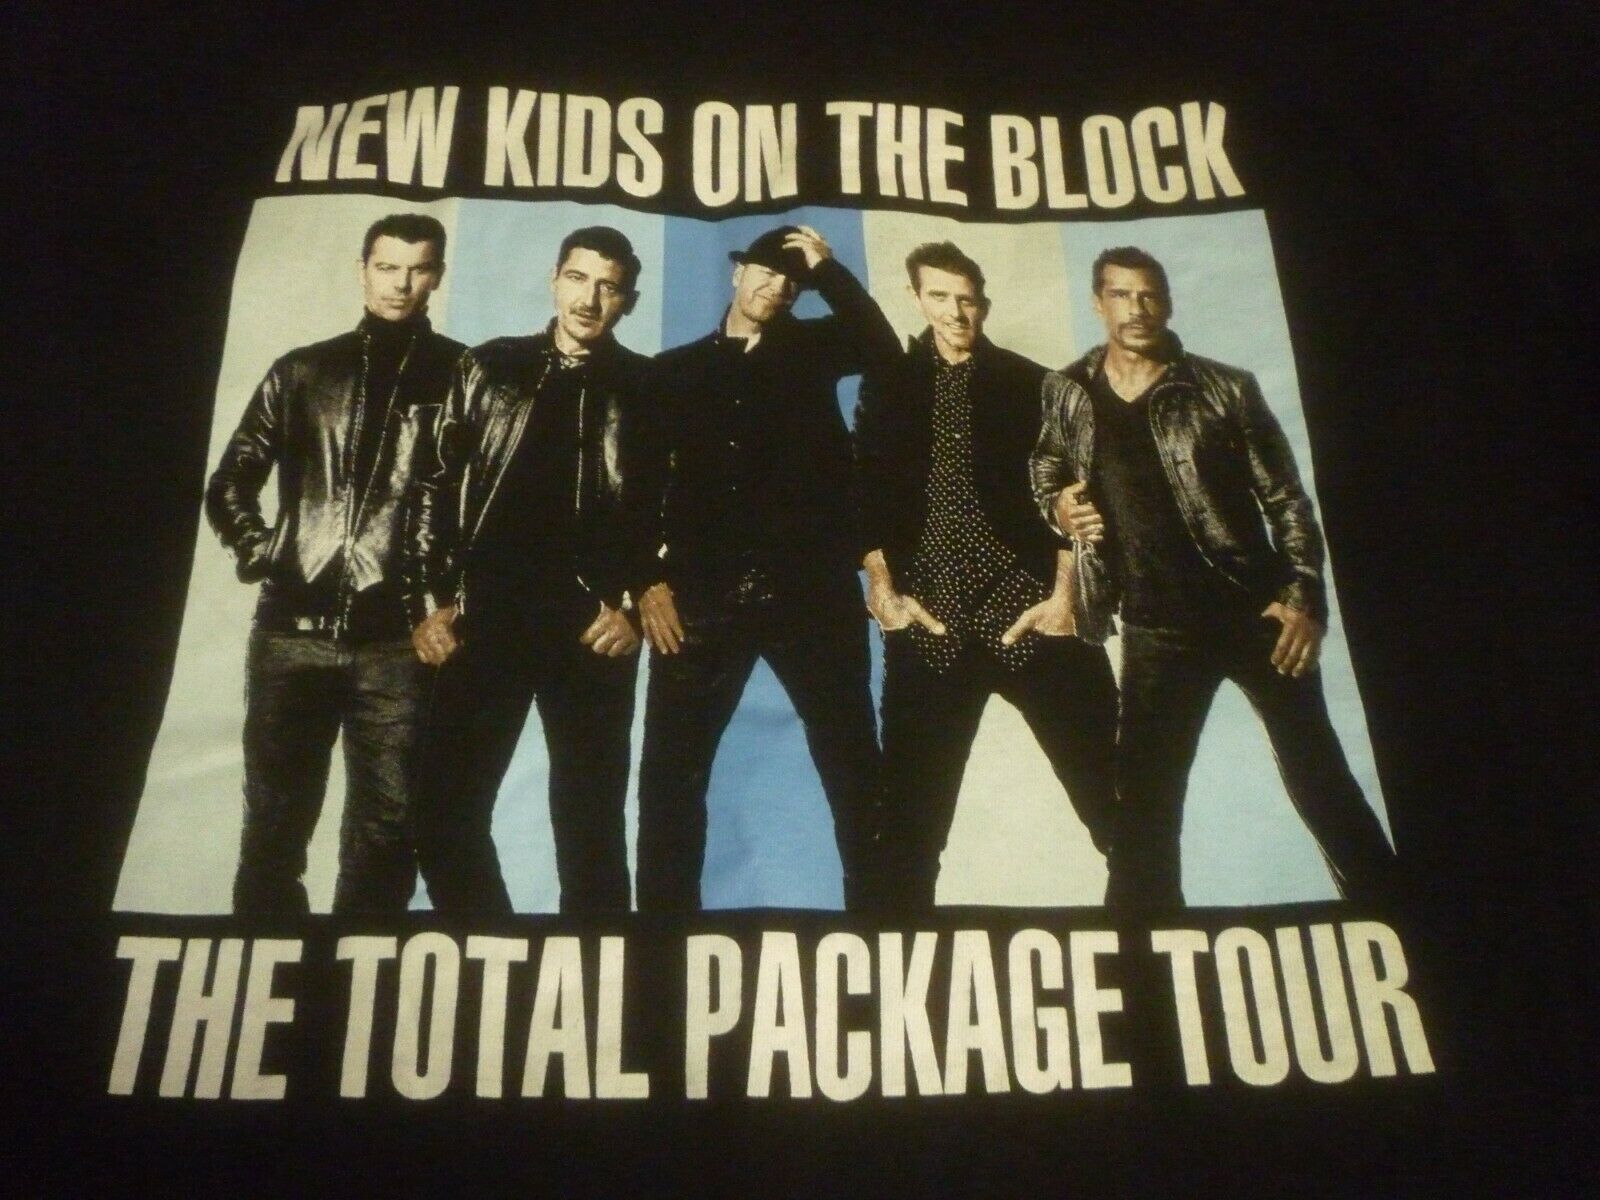 New Kids On The Block Shirt - Used Size L - Very Nice Condition!!!